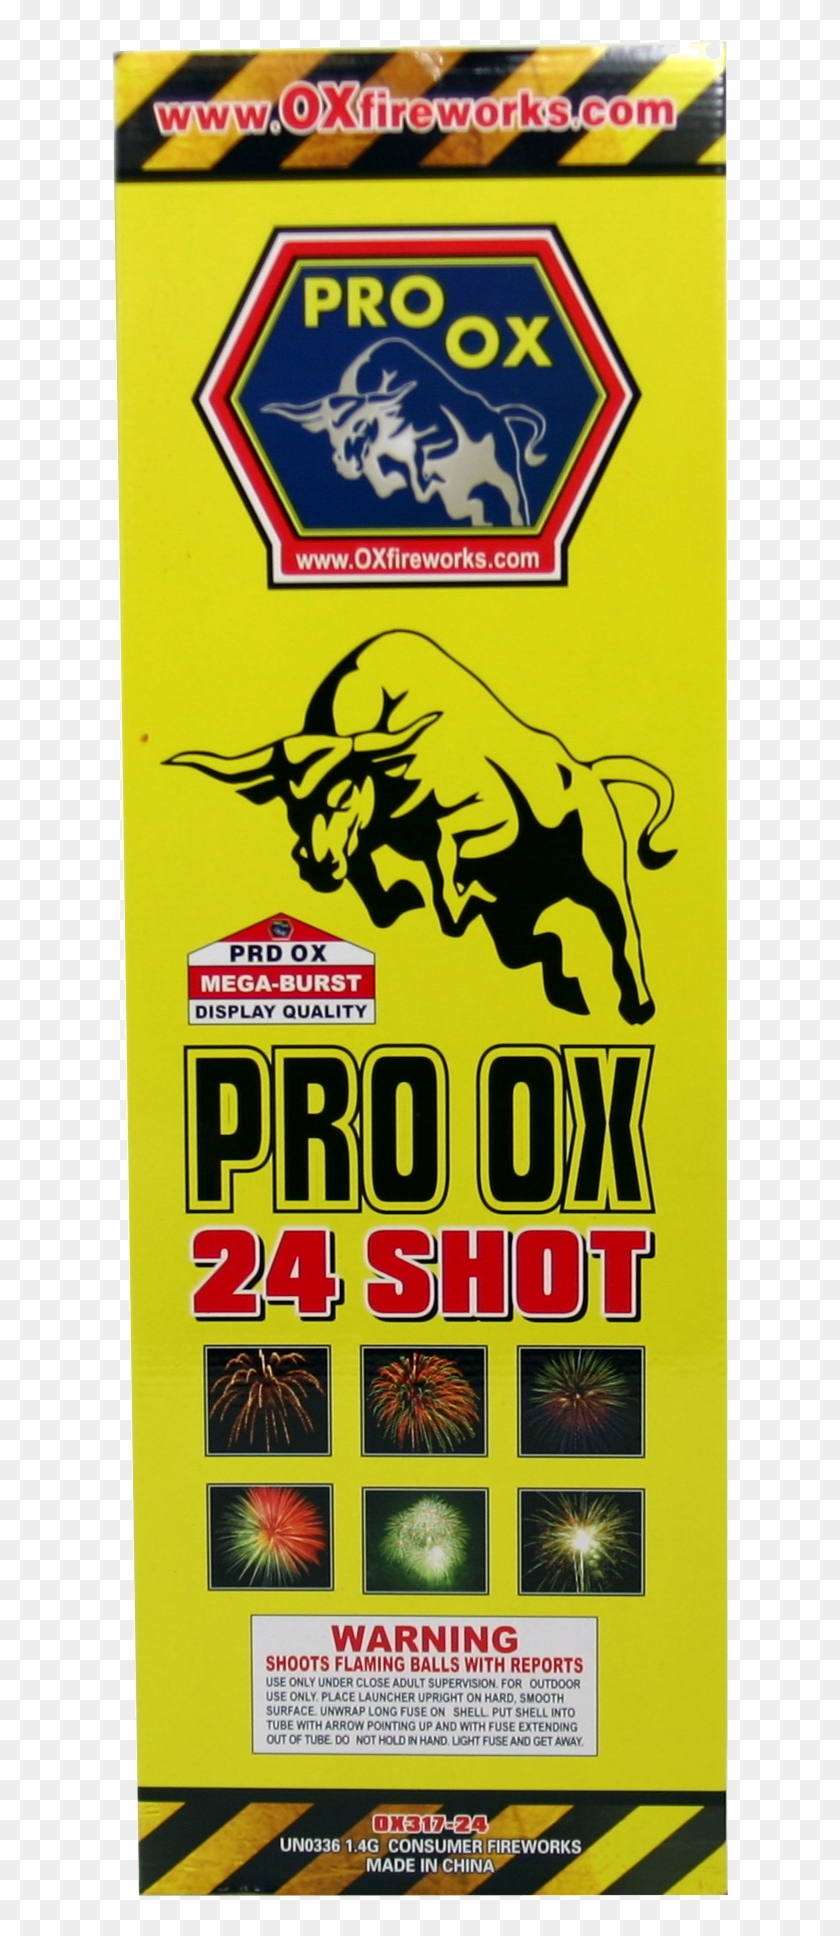 Pro Ox 24 Shot 24 Pack - Poster Clipart #207799